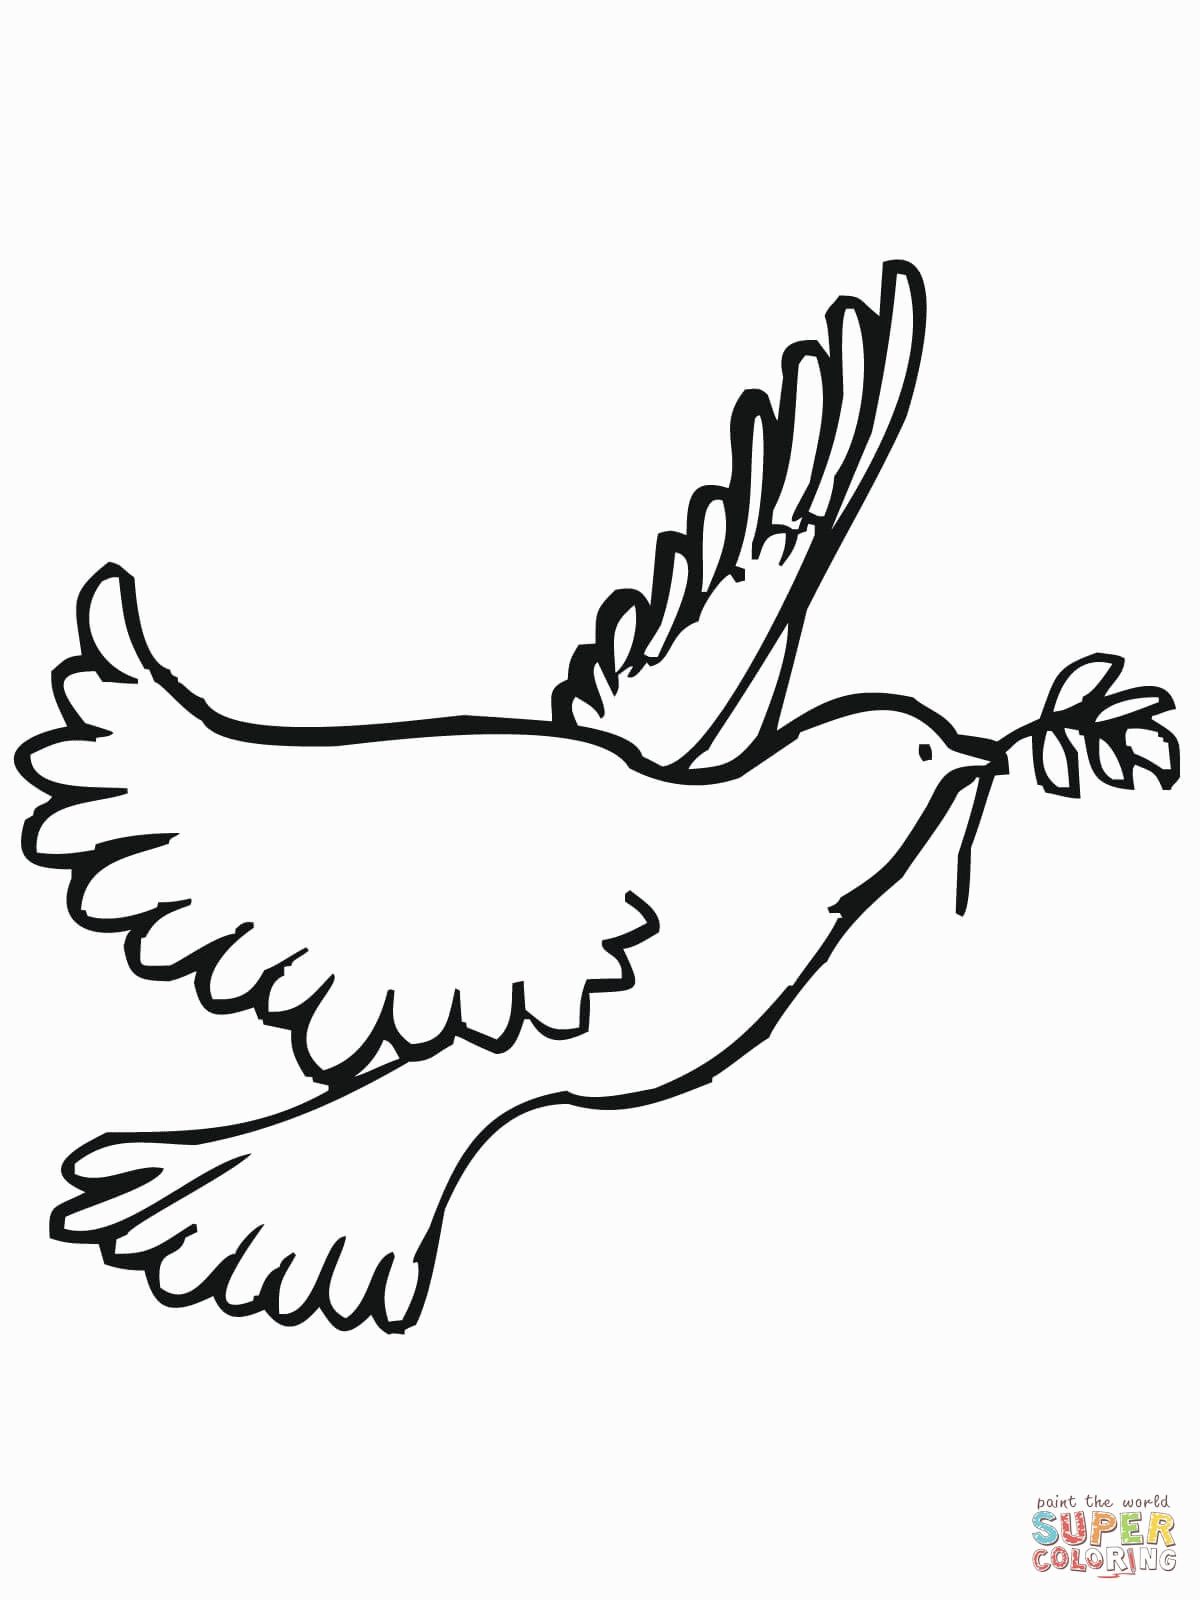 How To Make Doves Coloring Pages Free Coloring Pages - Widetheme